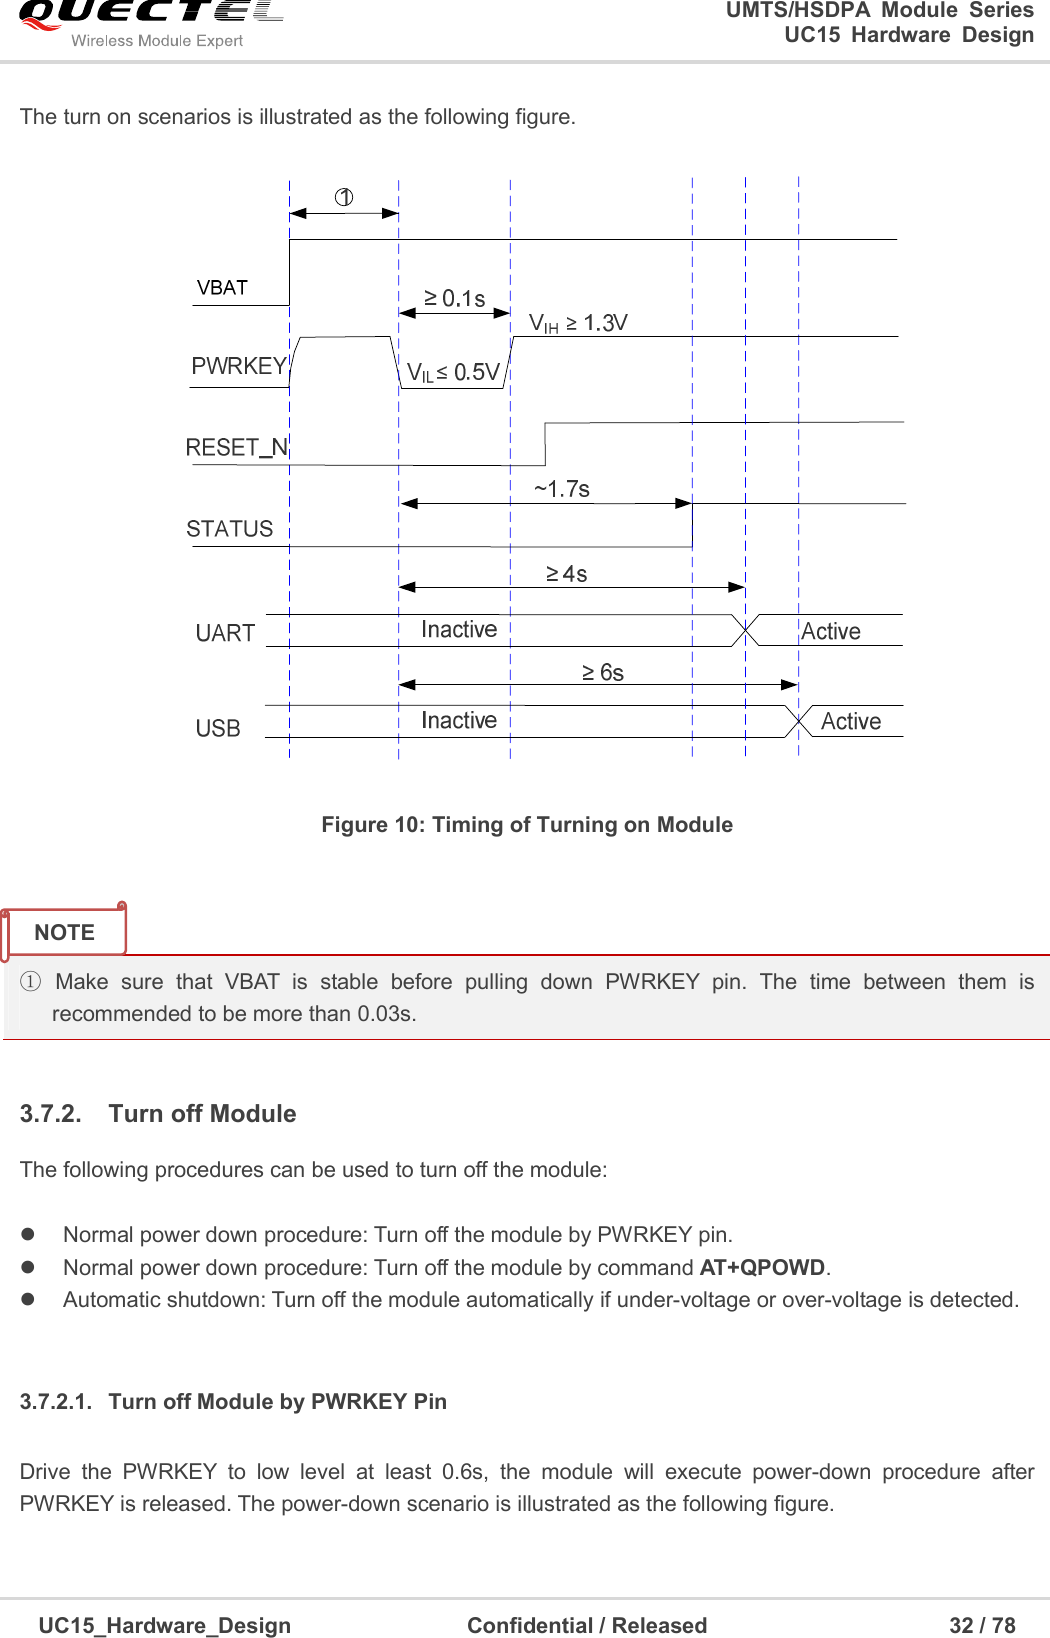                                                                        UMTS/HSDPA  Module  Series                                                                 UC15 Hardware Design  UC15_Hardware_Design                                Confidential / Released                                            32 / 78    The turn on scenarios is illustrated as the following figure.    Figure 10: Timing of Turning on Module   ①  Make  sure  that  VBAT  is  stable  before  pulling  down  PWRKEY  pin.  The  time  between  them  is recommended to be more than 0.03s.  3.7.2.  Turn off Module The following procedures can be used to turn off the module:    Normal power down procedure: Turn off the module by PWRKEY pin.   Normal power down procedure: Turn off the module by command AT+QPOWD.   Automatic shutdown: Turn off the module automatically if under-voltage or over-voltage is detected.  3.7.2.1.  Turn off Module by PWRKEY Pin   Drive  the  PWRKEY  to  low  level  at  least  0.6s,  the  module  will  execute  power-down  procedure  after PWRKEY is released. The power-down scenario is illustrated as the following figure. NOTE 